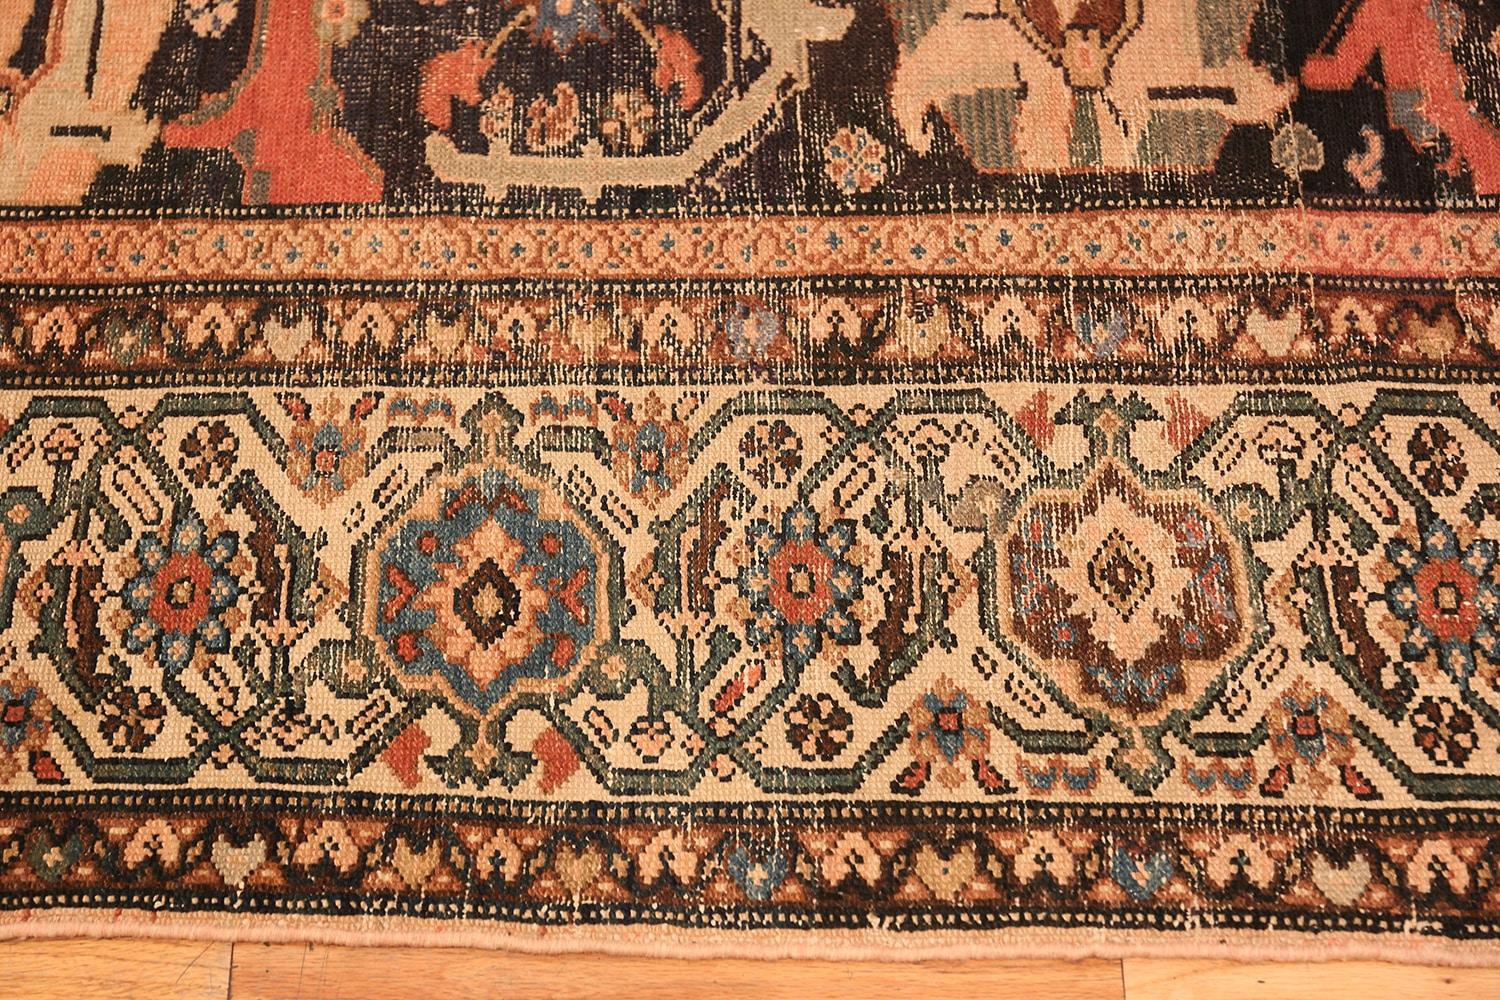 Beautiful Tribal Antique Shabby Chic Antique Malayer Rug, Country Of Origin / Rug Type: Persian Rugs, Circa Date: Late 19th Century. Size: 8 ft 6 in x 12 ft 9 in (2.59 m x 3.89 m)

